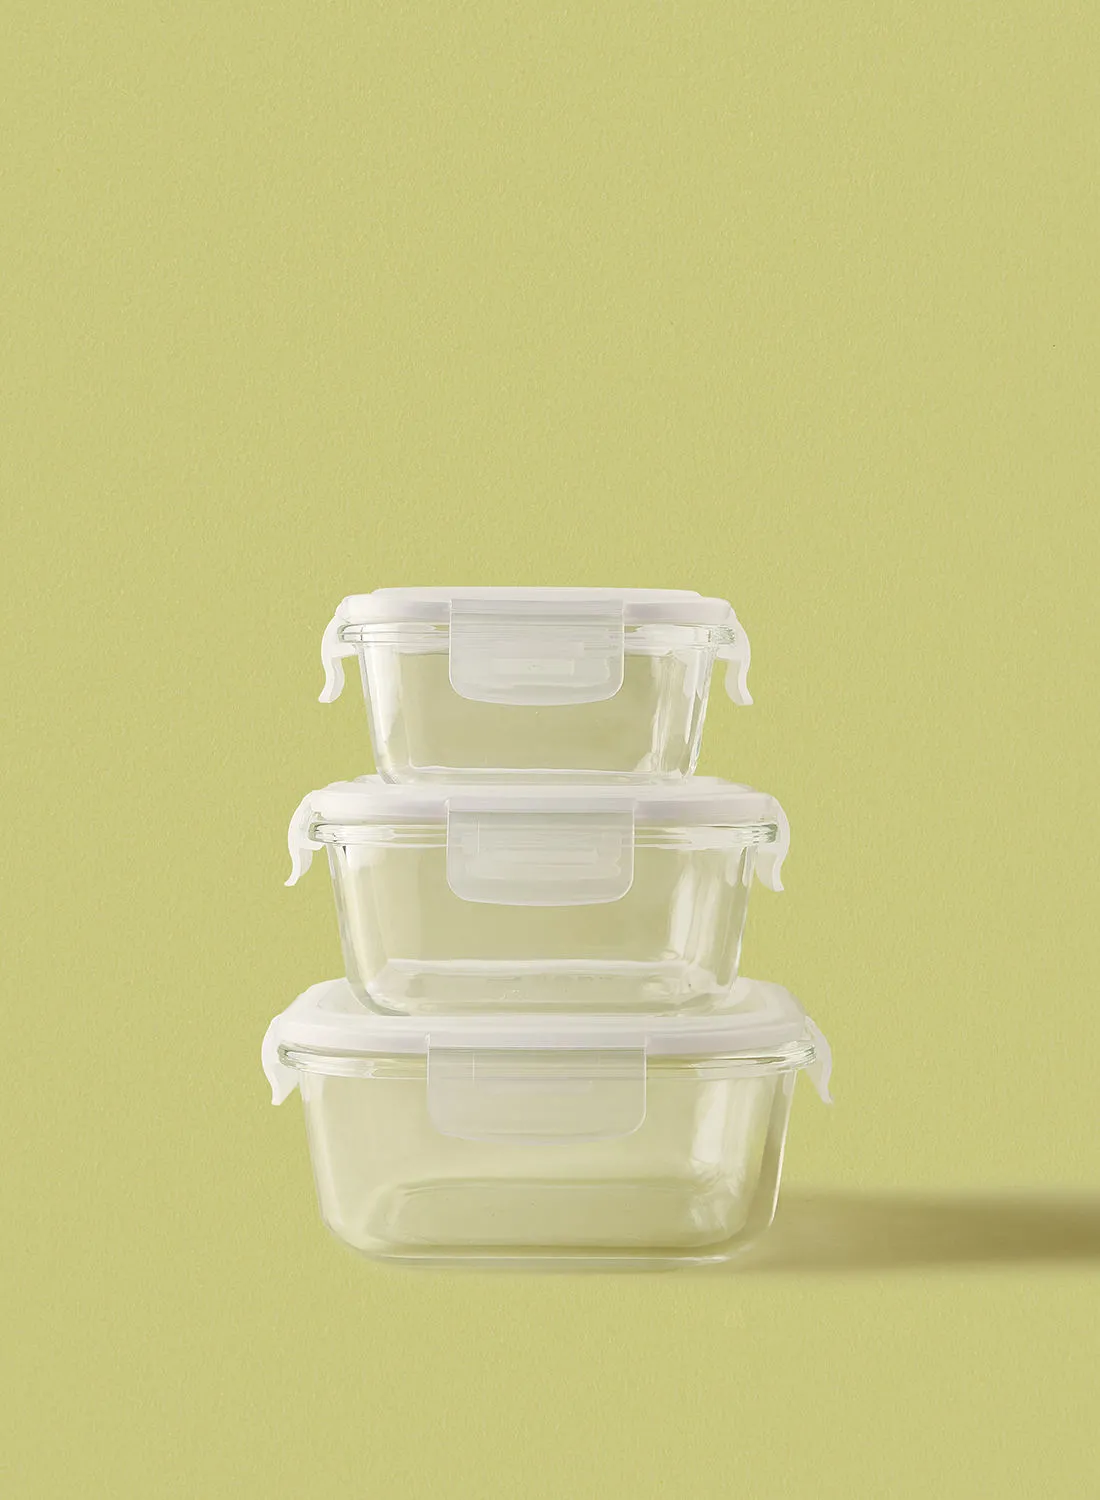 noon east 3 Piece Borosilicate Glass Food Container Set - Airtight Lids - Lunch Box - Sqaure - Food Storage Box - Storage Boxes - Kitchen Cabinet Organizers - Glass Food Container - White